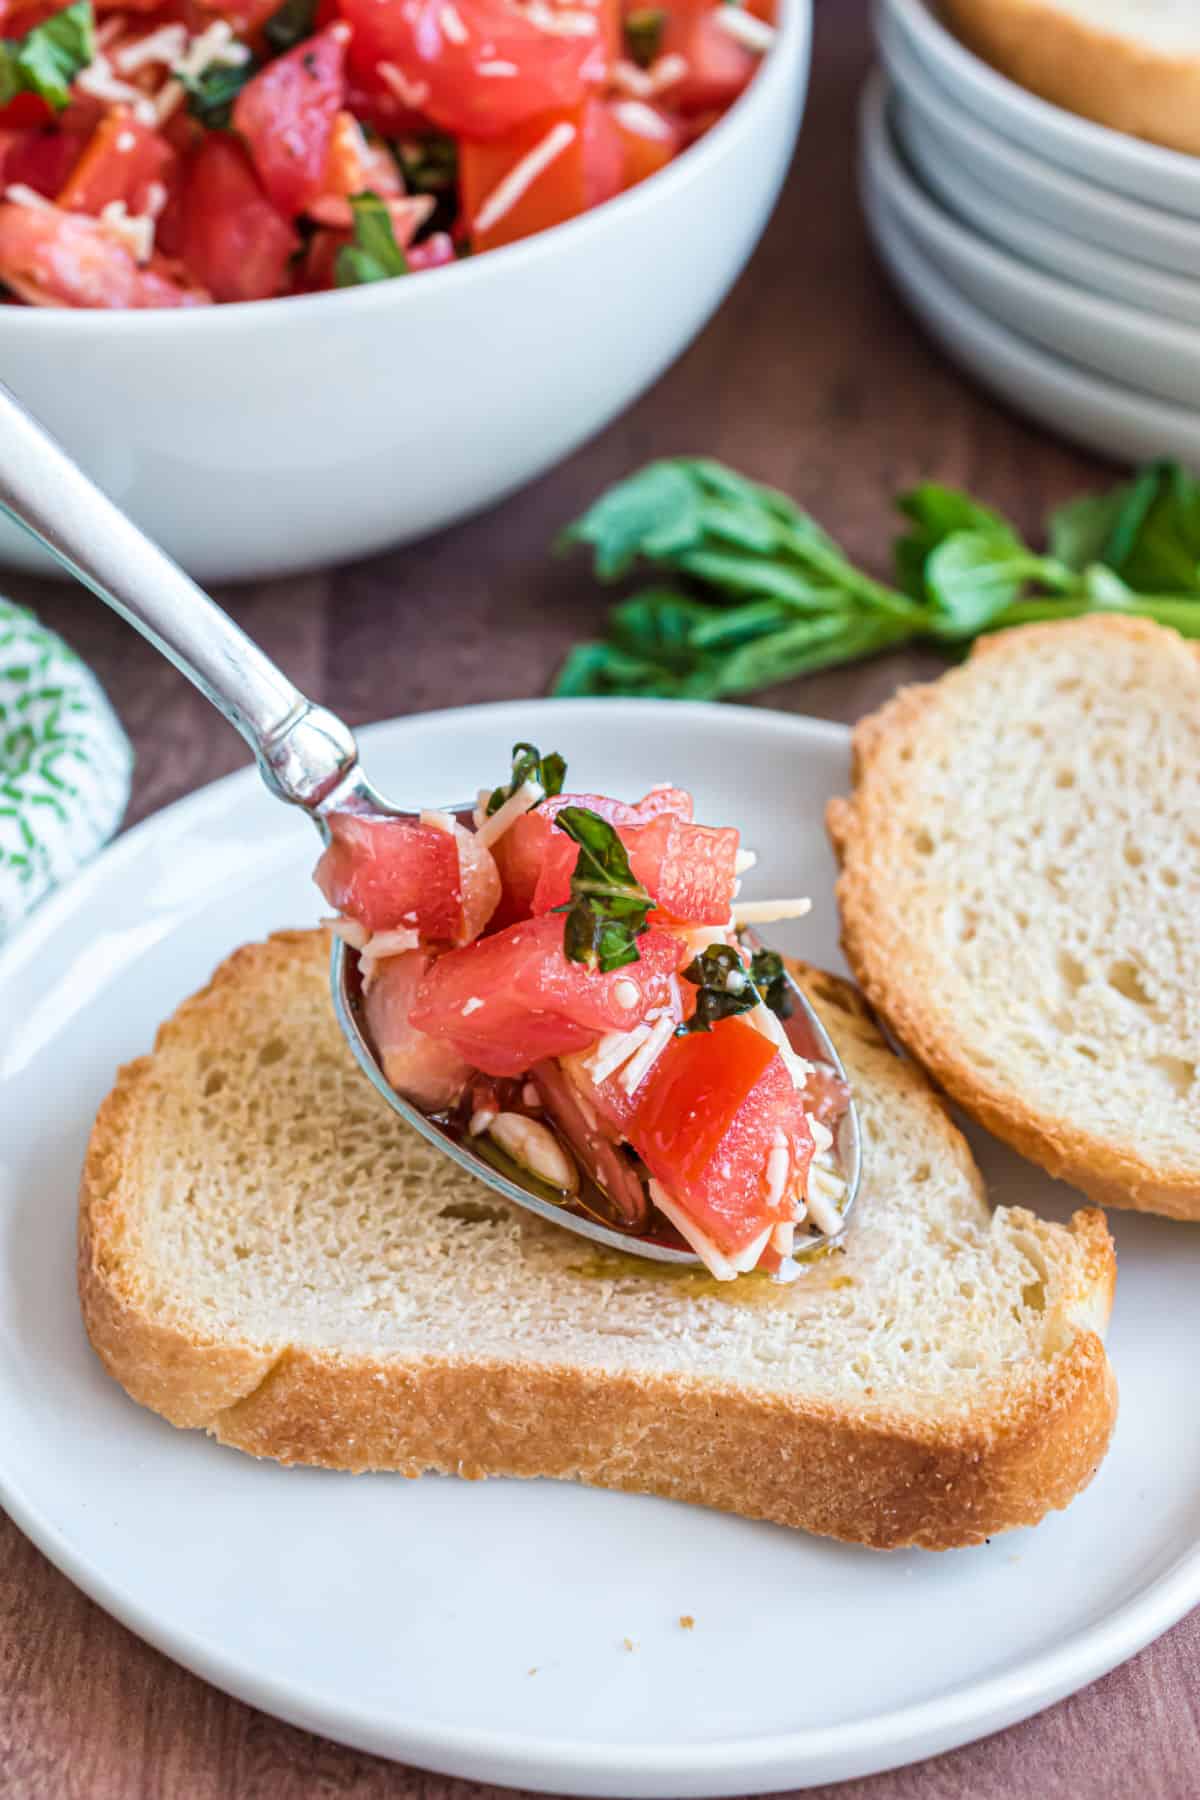 Bruschetta being scooped onto slices of bread for toasting.